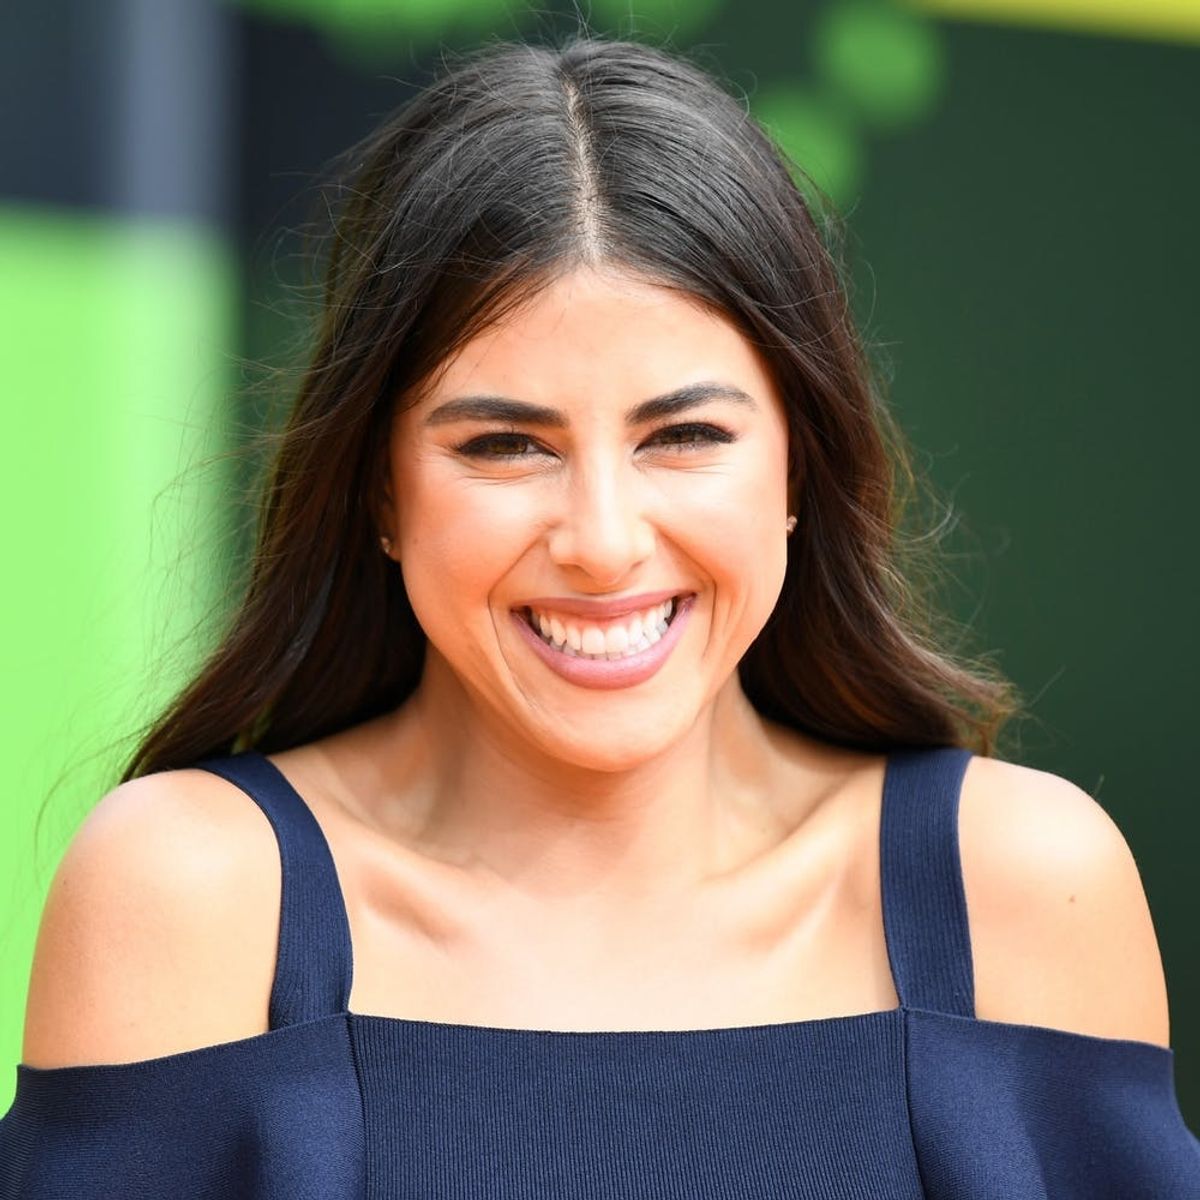 Nickelodeon Star Daniella Monet Is Engaged! Get the Details on Her Fiancé’s Romantic Proposal